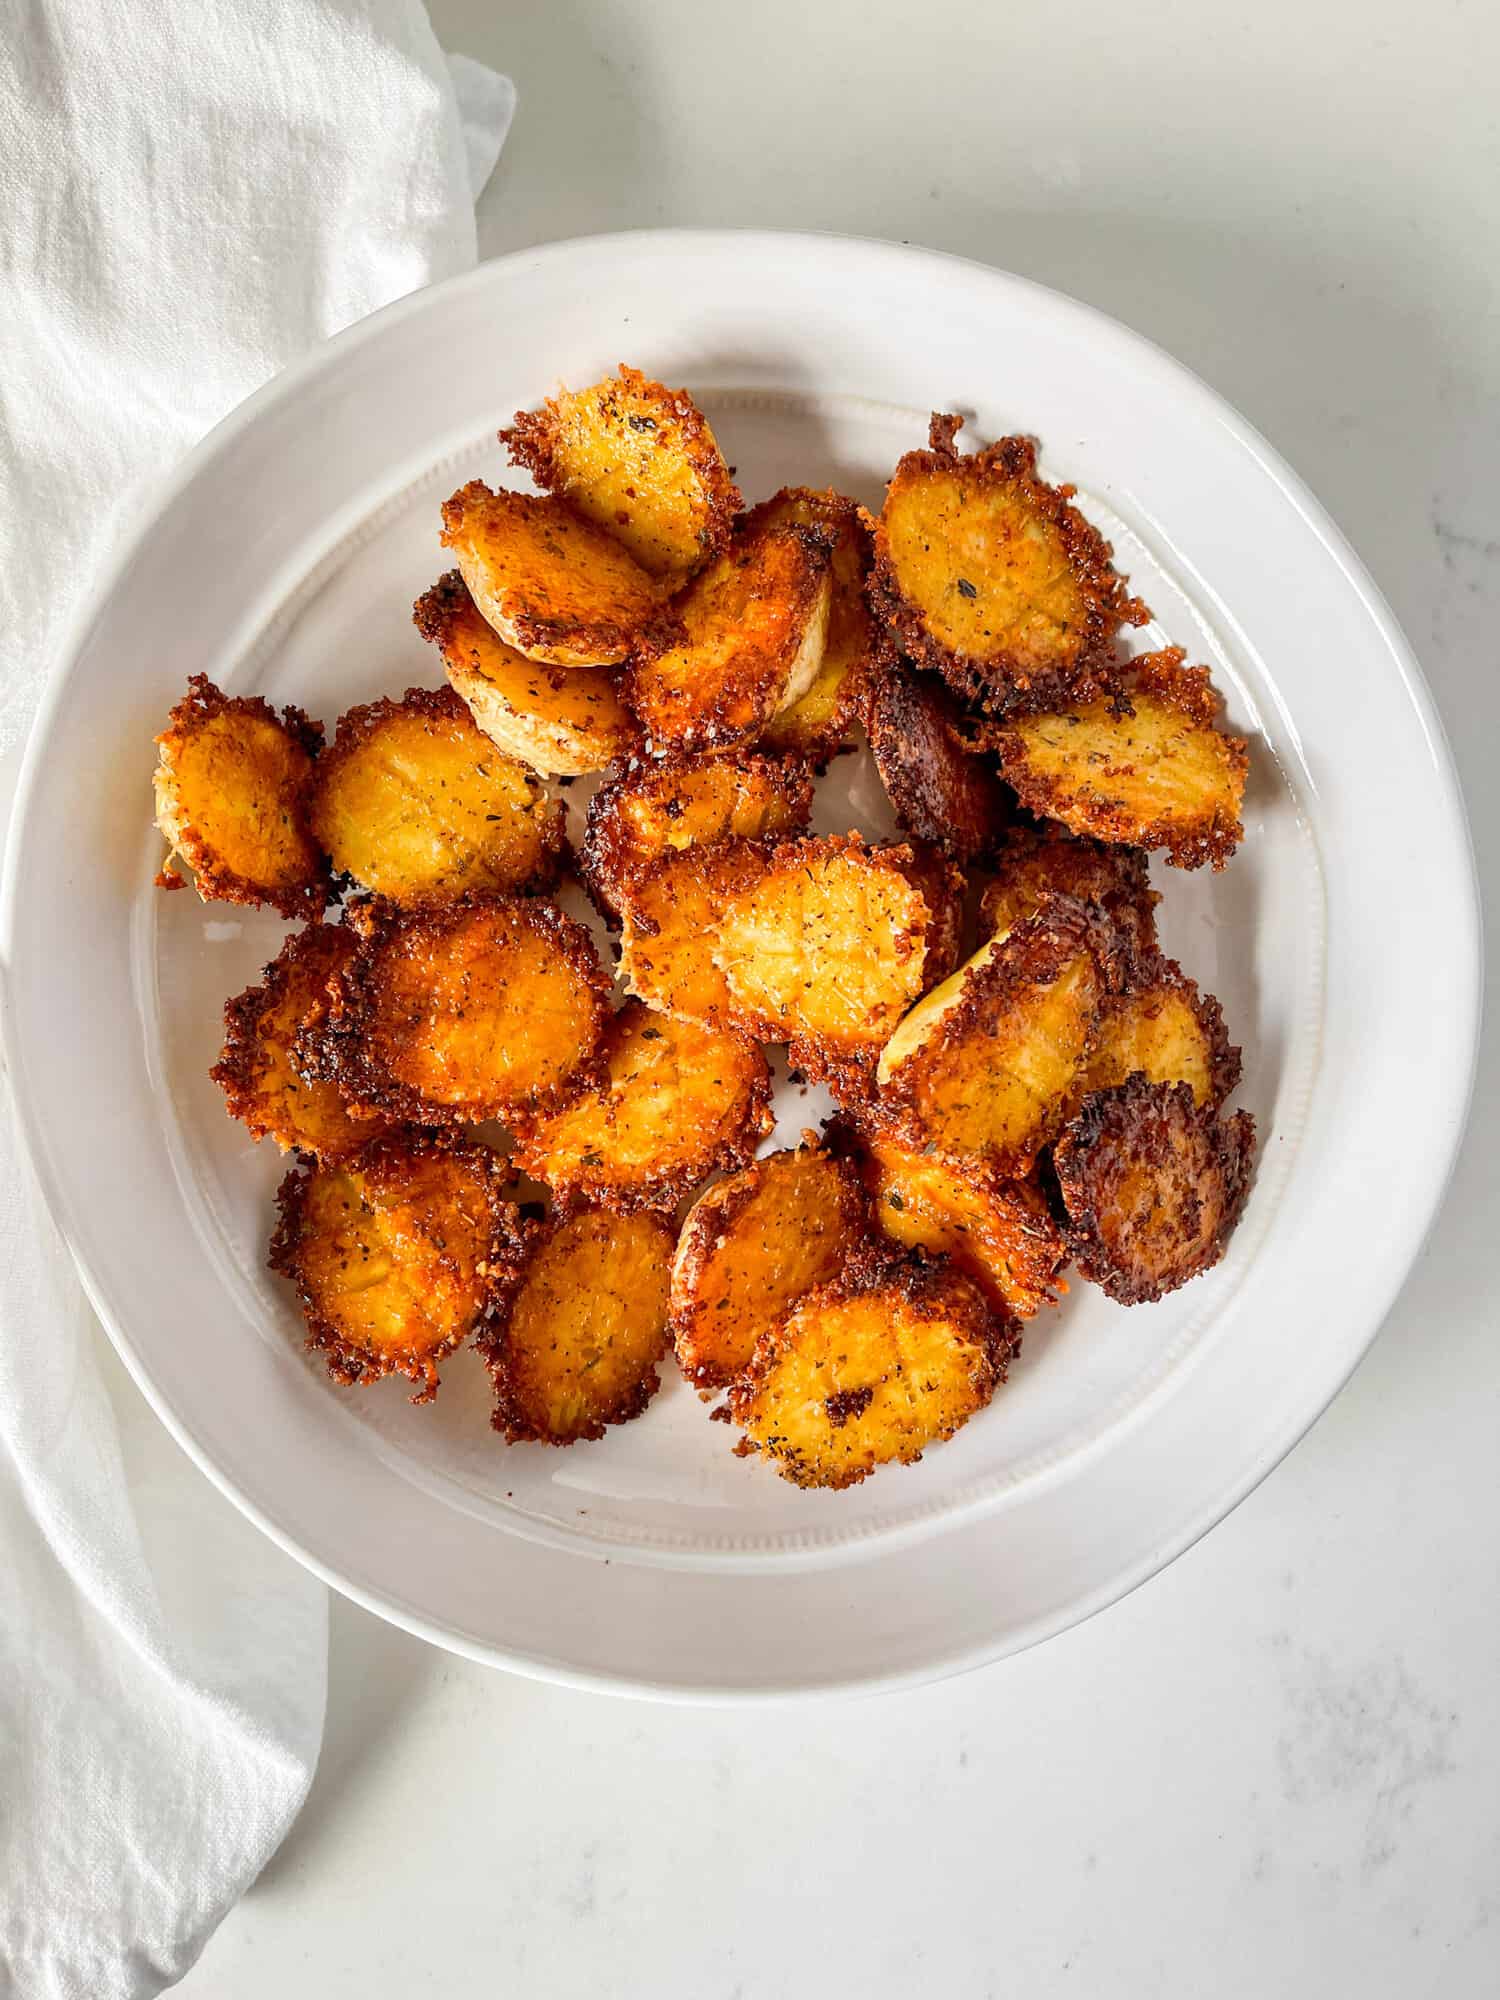 Parmesan crusted potatoes in a white serving bowl